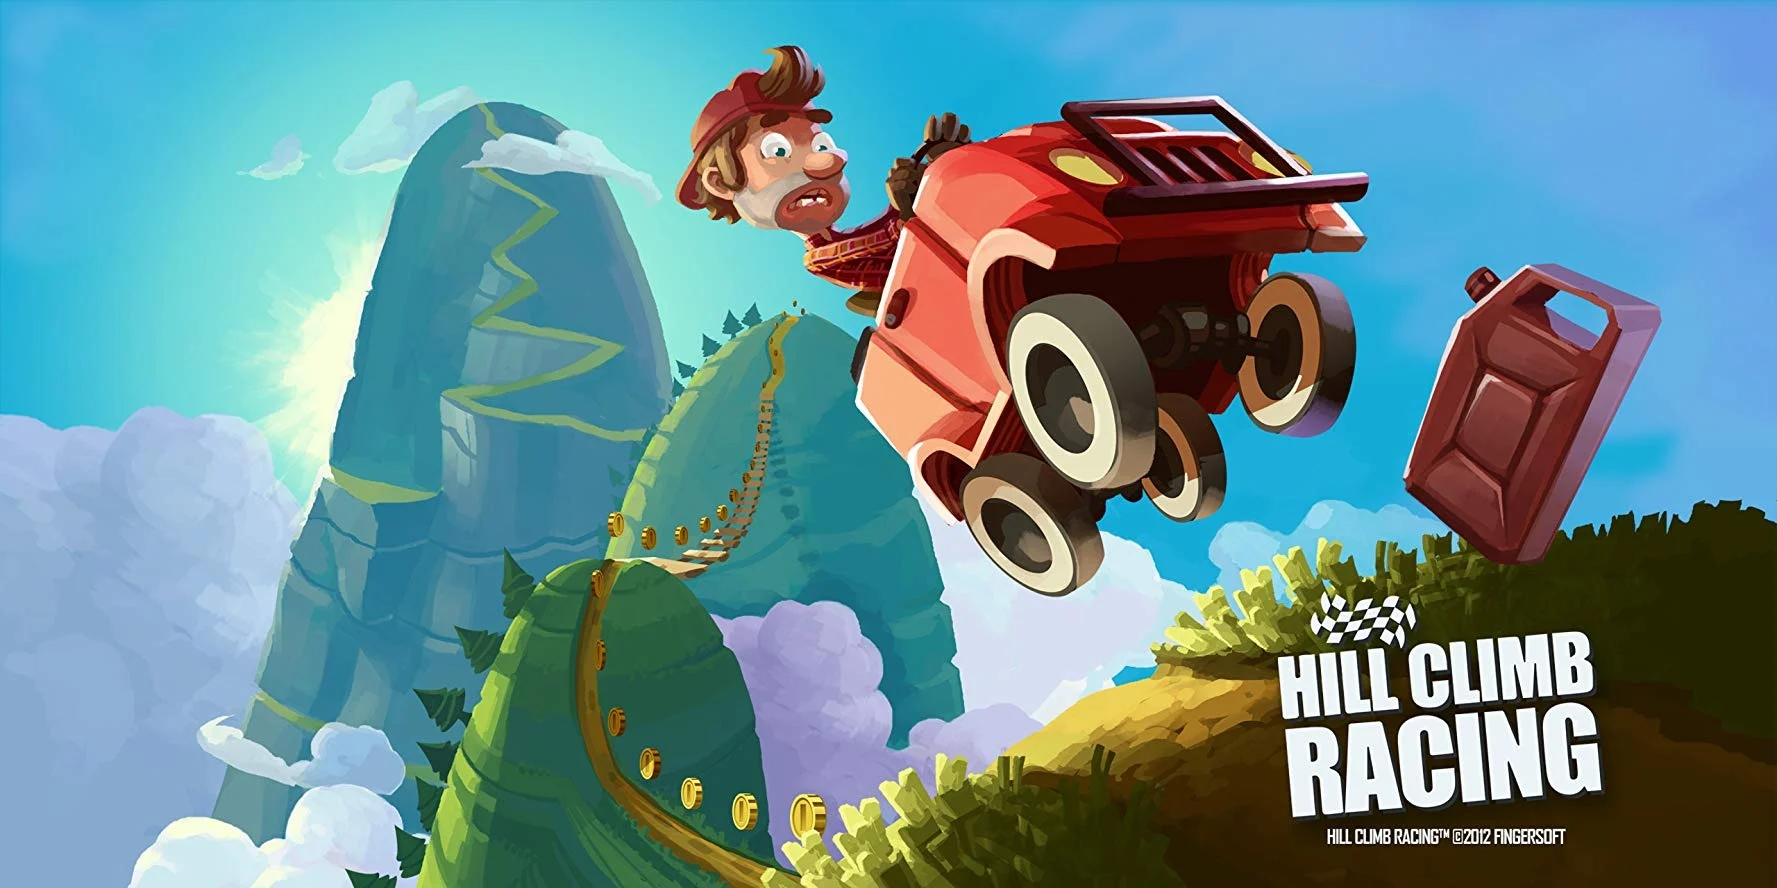 Hill Climb Racing Mod Apk - An Exciting Gameplay Experience with Realistic Physics